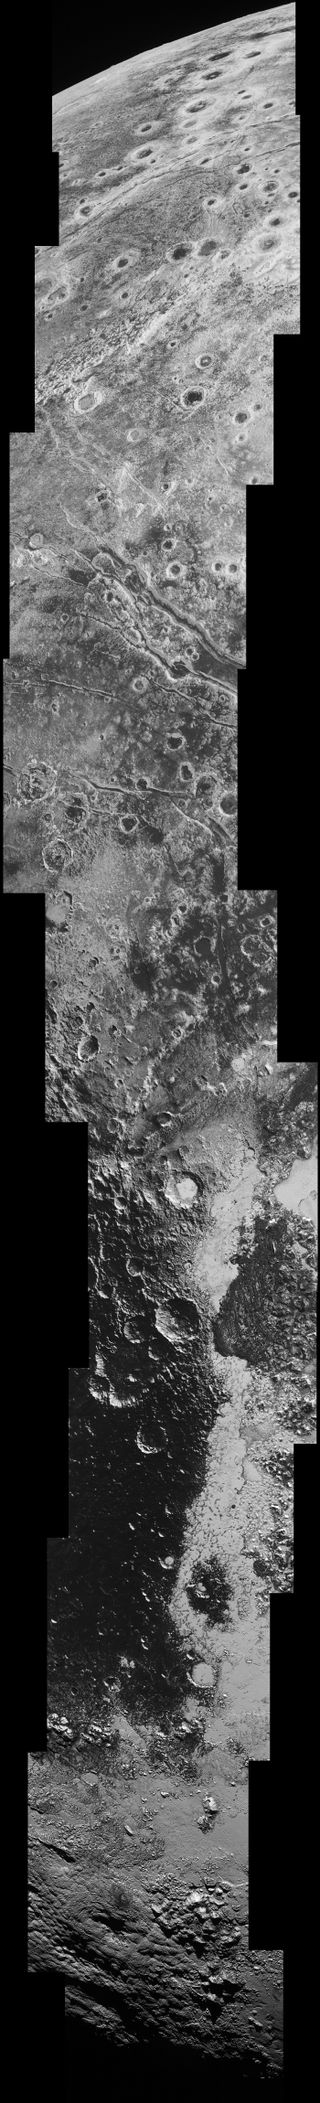 This image, taken by New Horizons' Long-Range Reconnaissance Imager (LORRI), was taken just before the craft's closest approach to the dwarf planet. To see details as small as 500 yards across, click "view full size image."